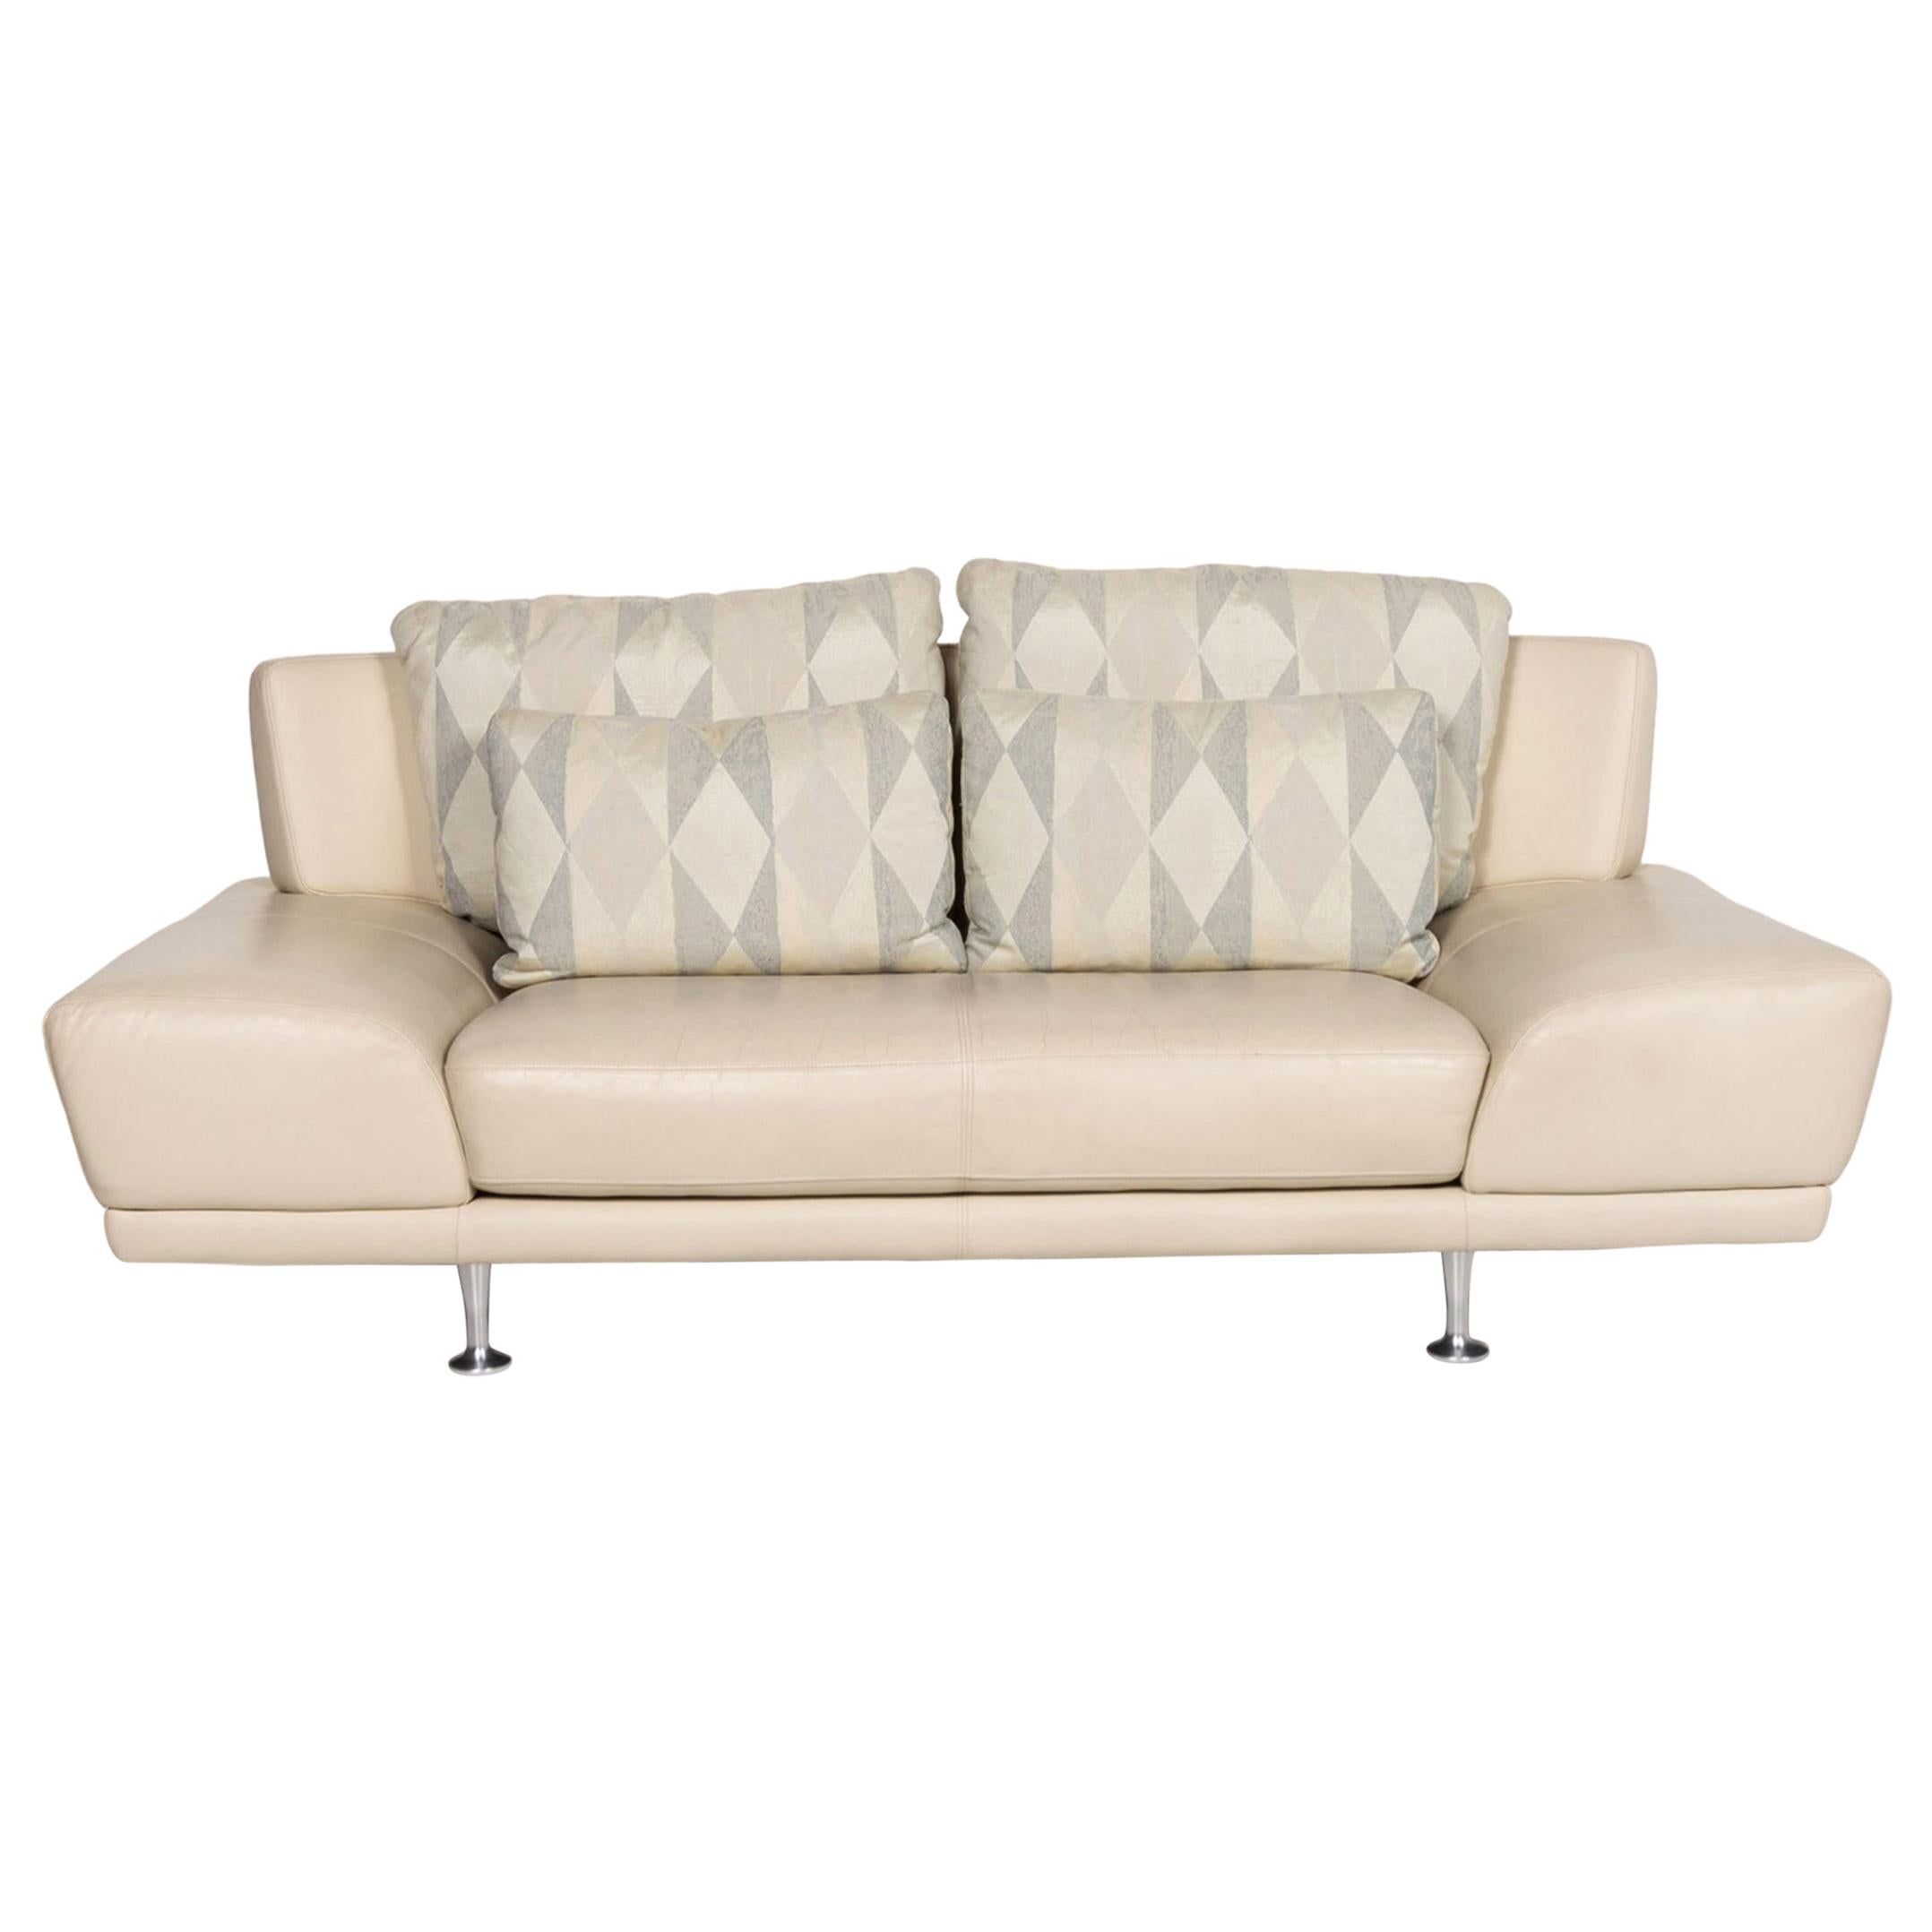 Rolf Benz Leather Sofa Cream Two-Seat Couch For Sale